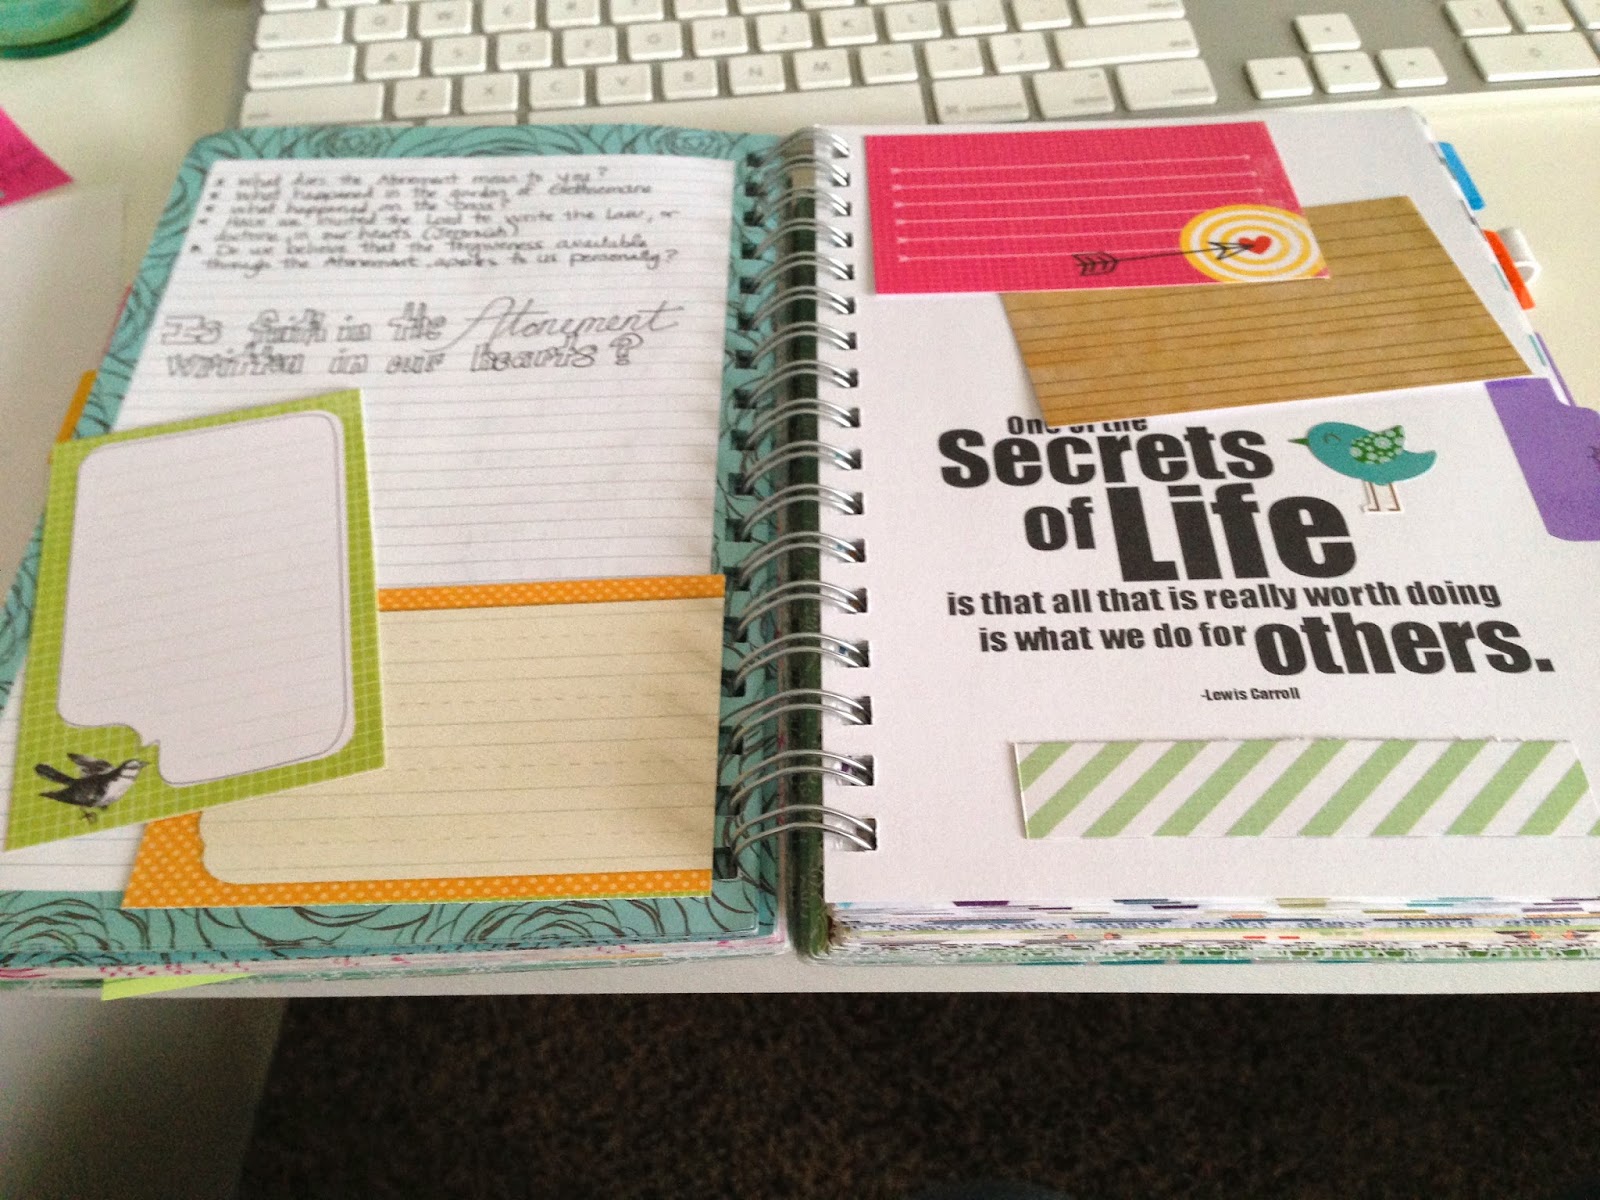 Mormon Mom Planners - Monthly Planner/Weekly Planner: Using Washi Tape &  Scrapbook Paper to utilize your planner